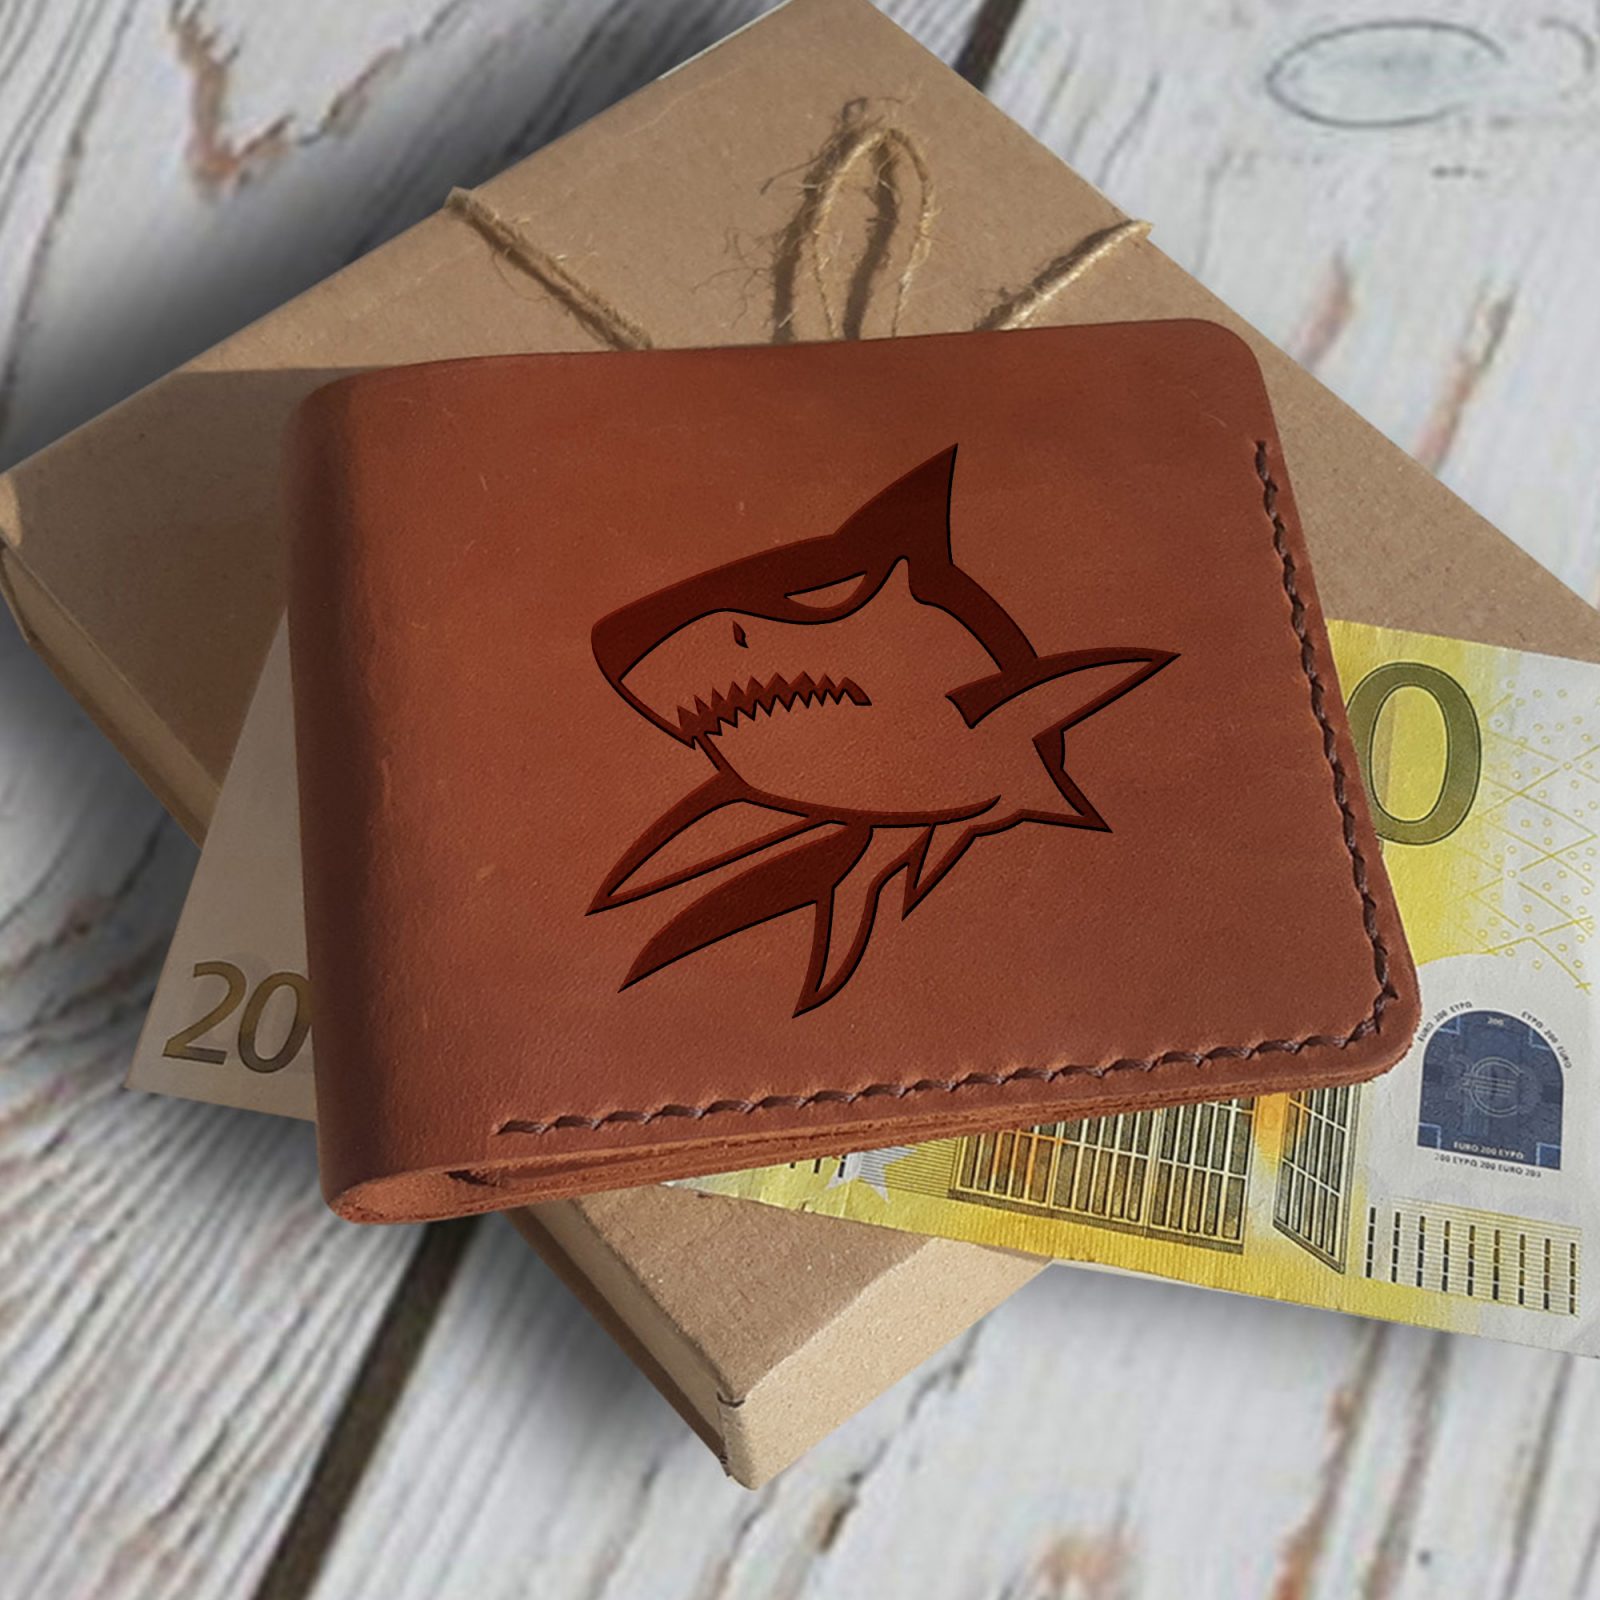 Gifts for Fisherman who Has Everything ➤➤➤ Engraved leather wallet